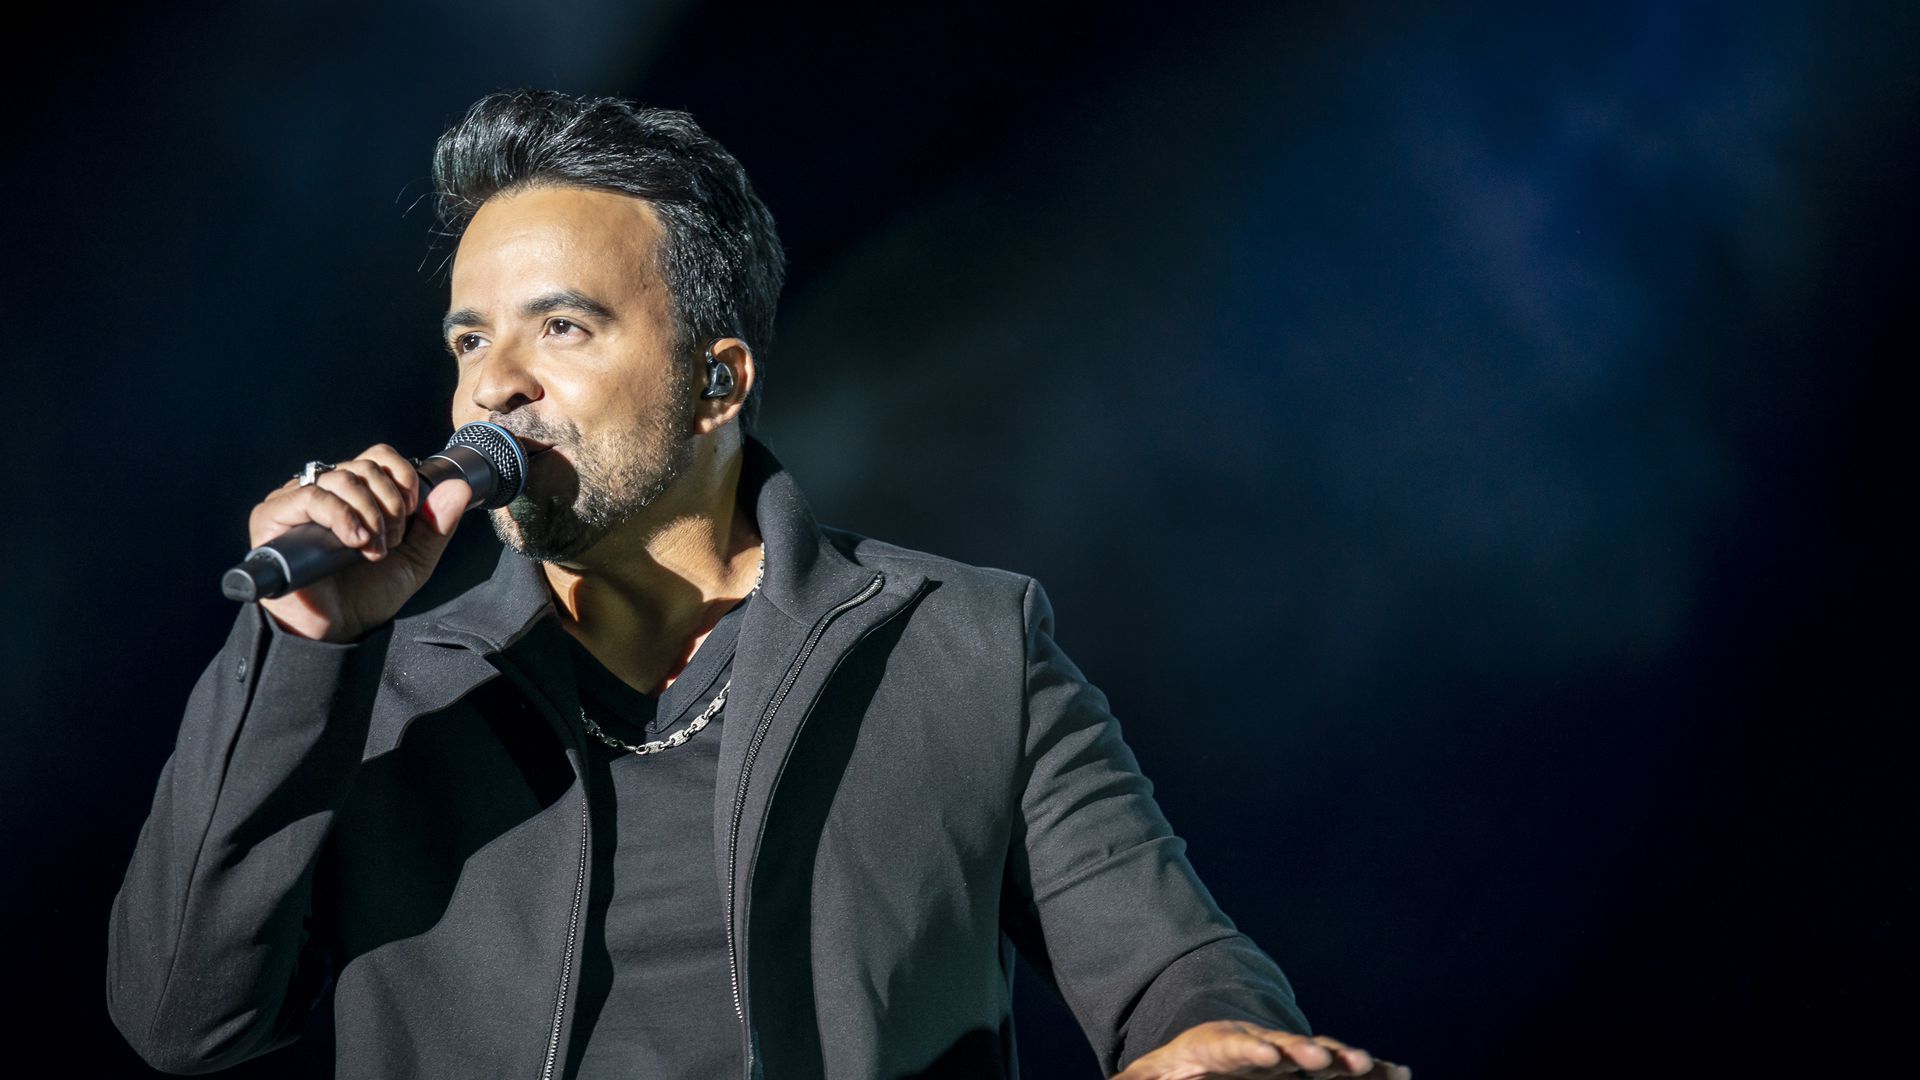 Luis Fonsi sings with a microphone to his mouth with a black background